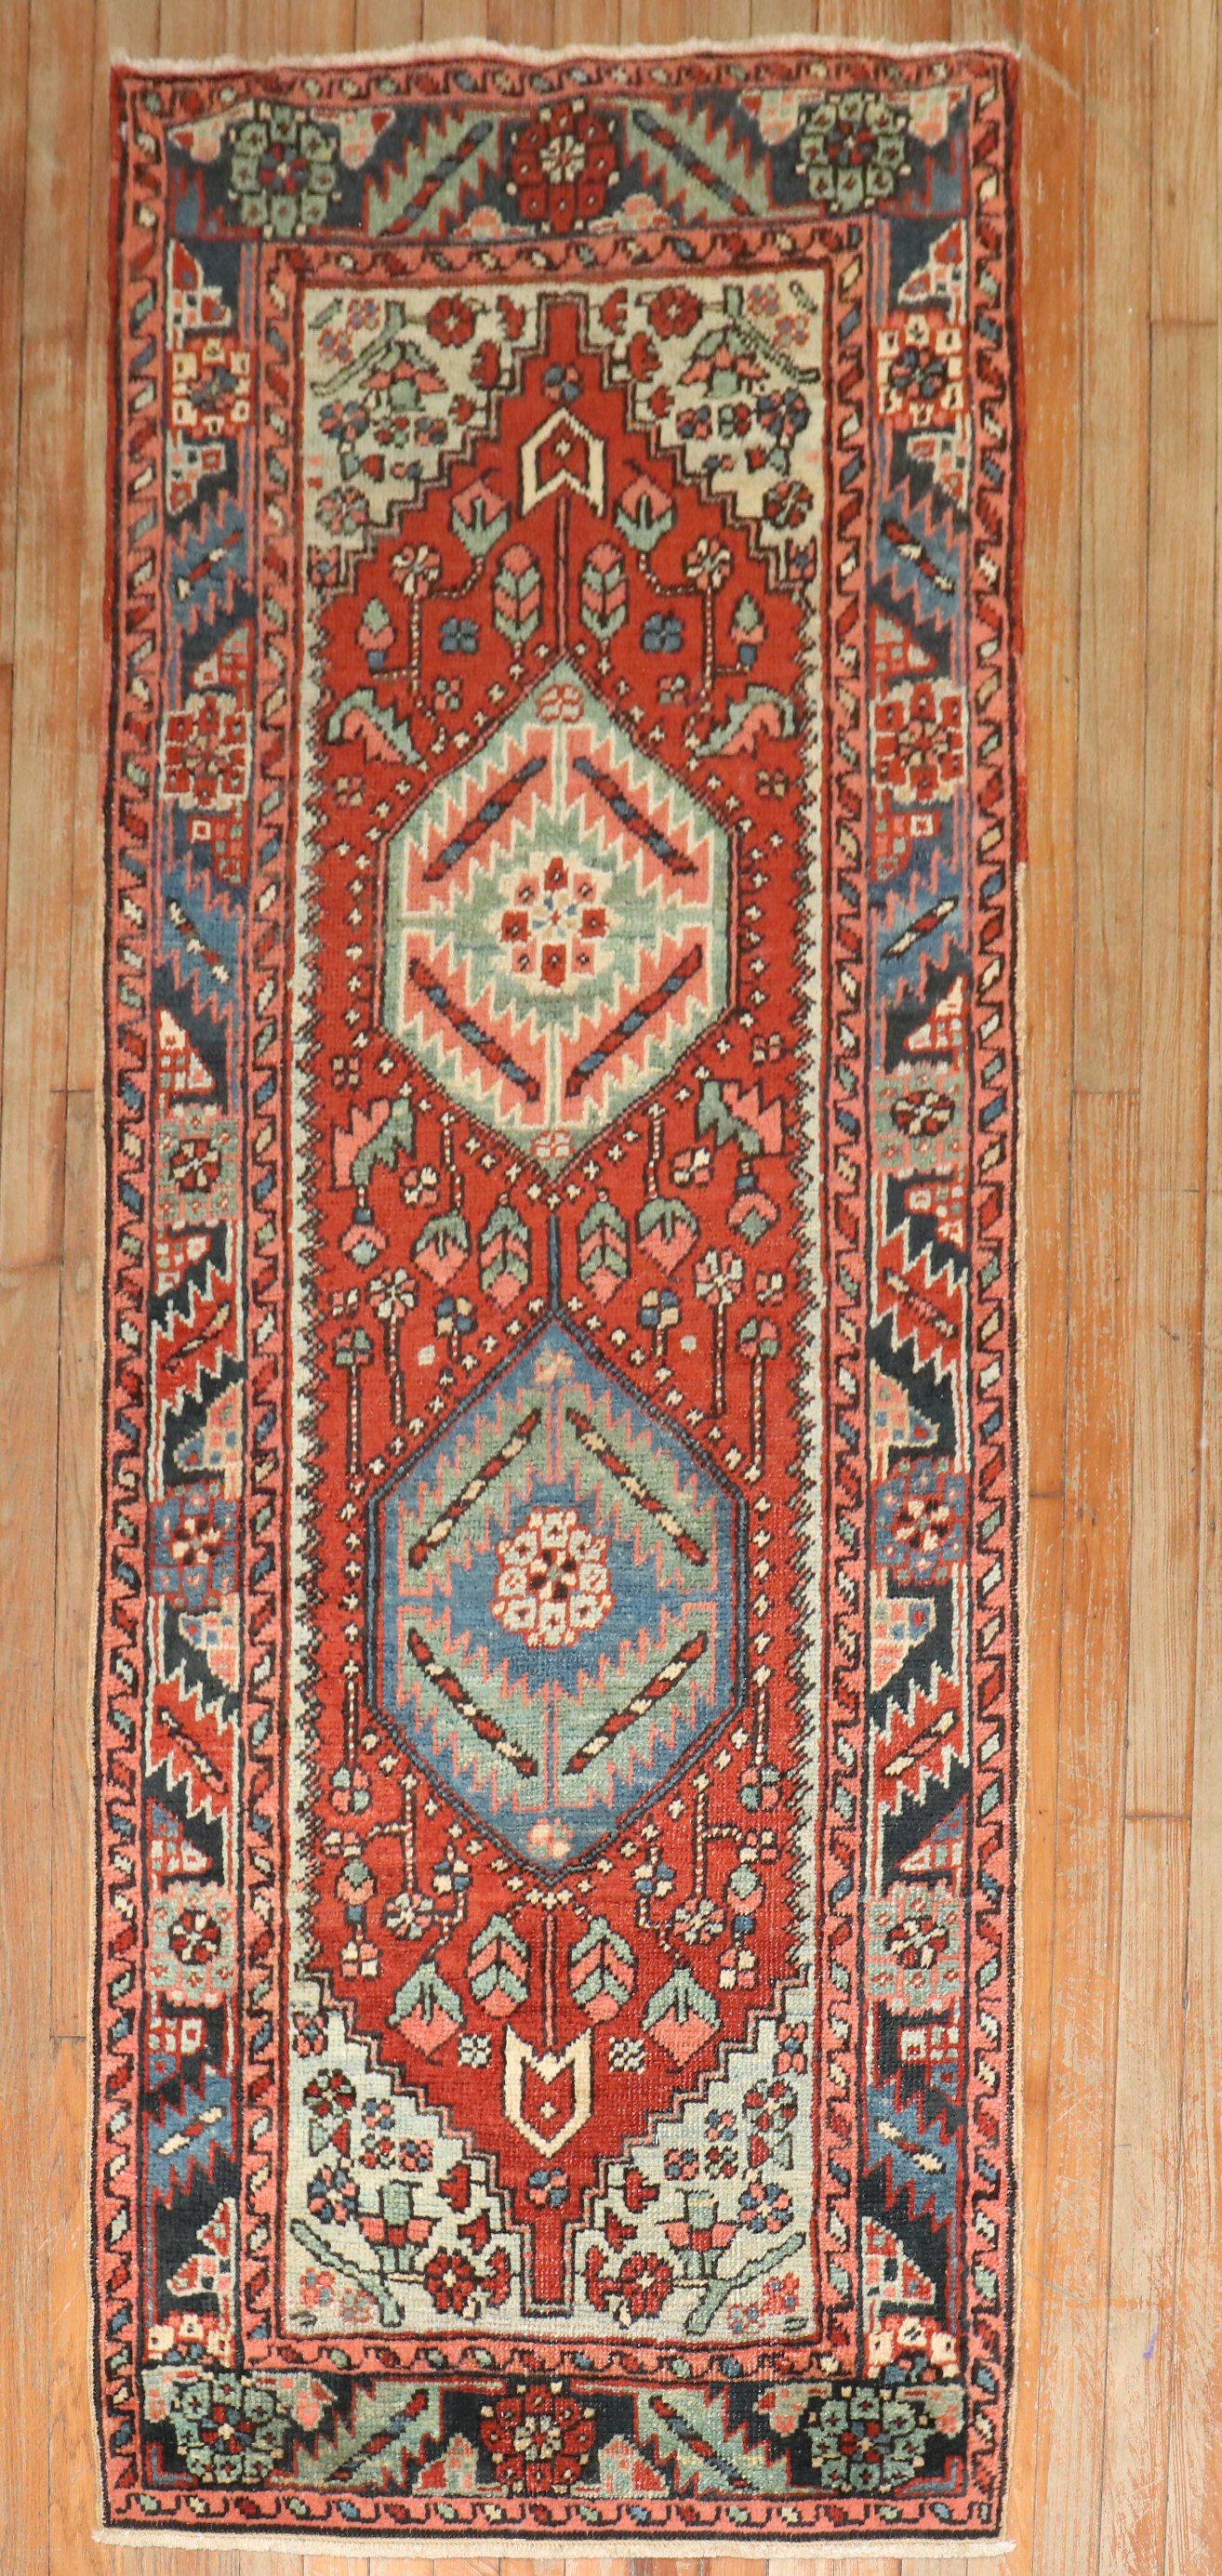 An early 20th-century Persian heriz small runner 

Measures: 2'8'' x 6'10''

Heriz carpets are beloved for their versatility. Their geometry complements modern furnishings and their warm colors and artistic depth enhance antiques of all kinds. Their